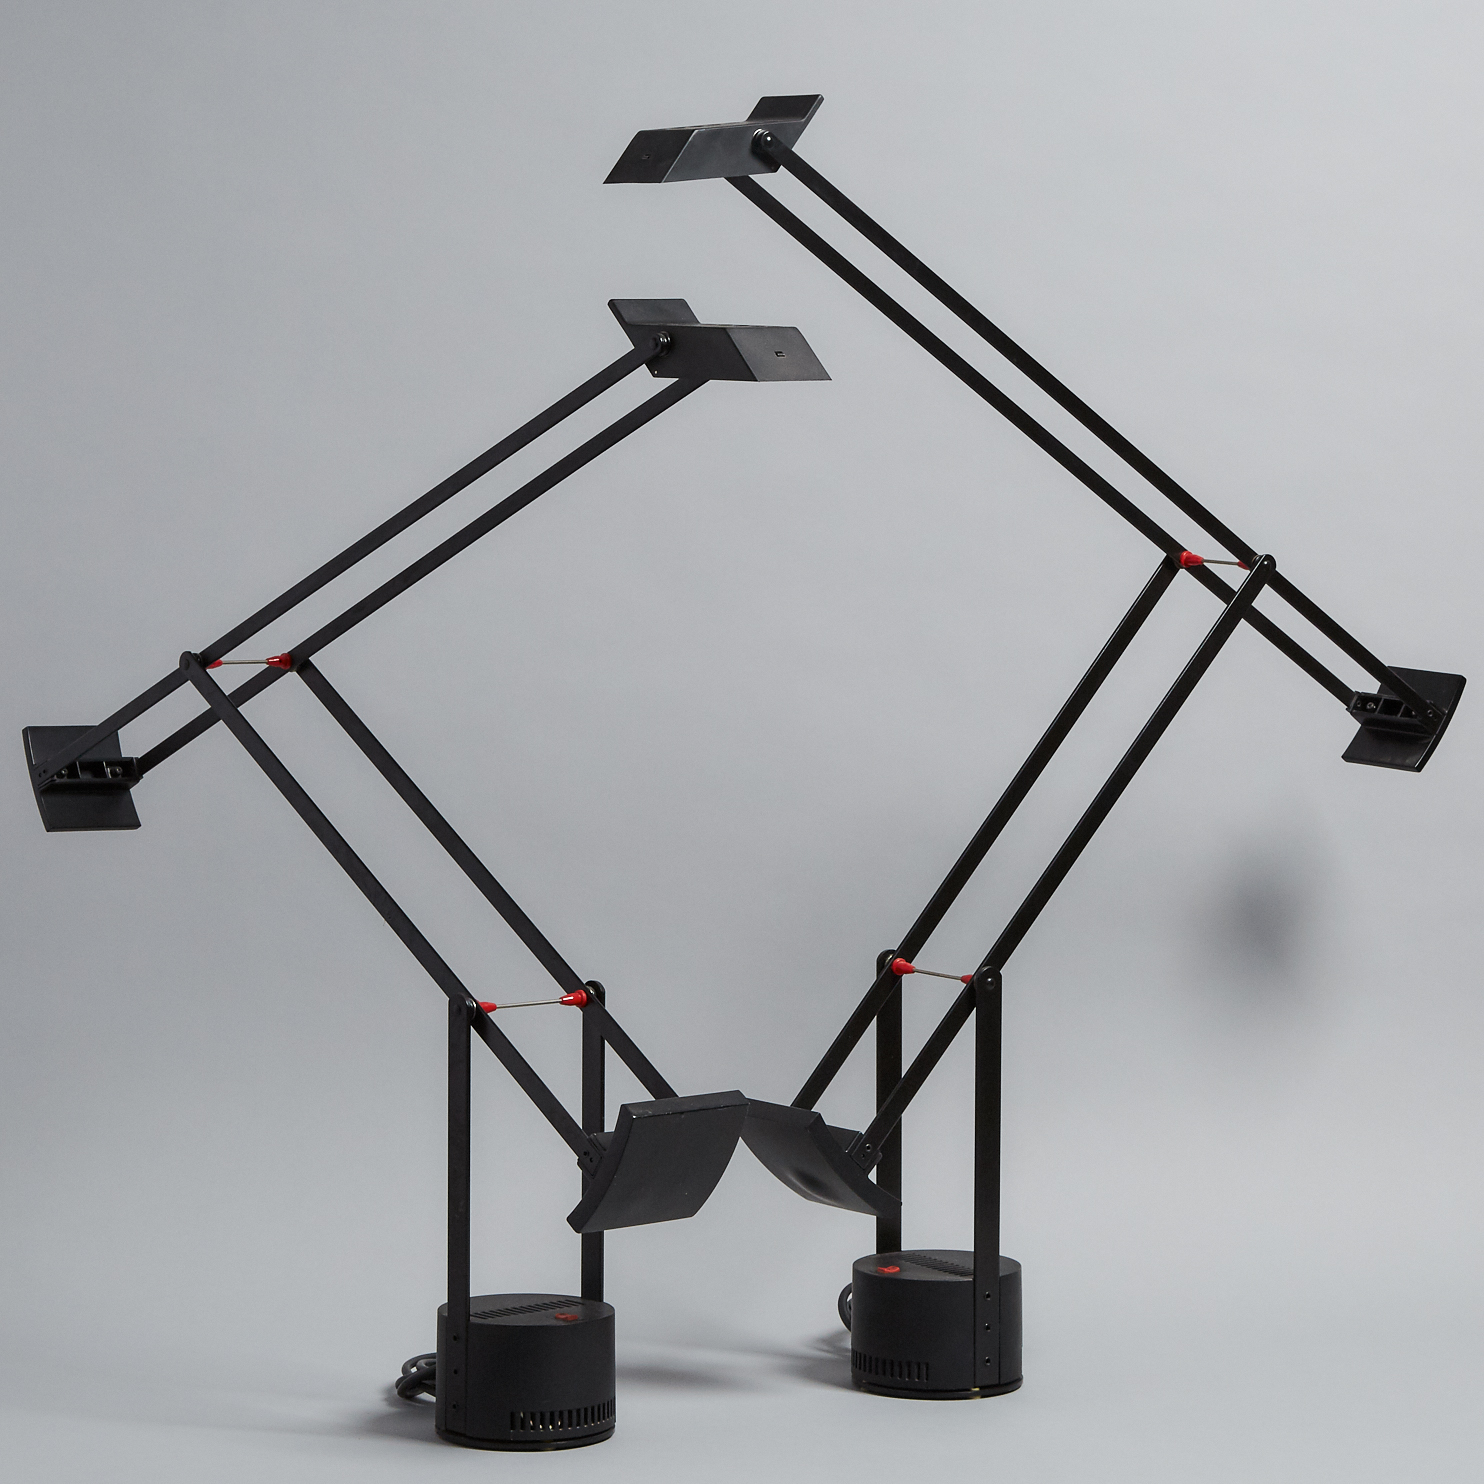 Pair of 'Tizio' Desk Lamps by Richard Sapper for Artemide, Italy, c.1984